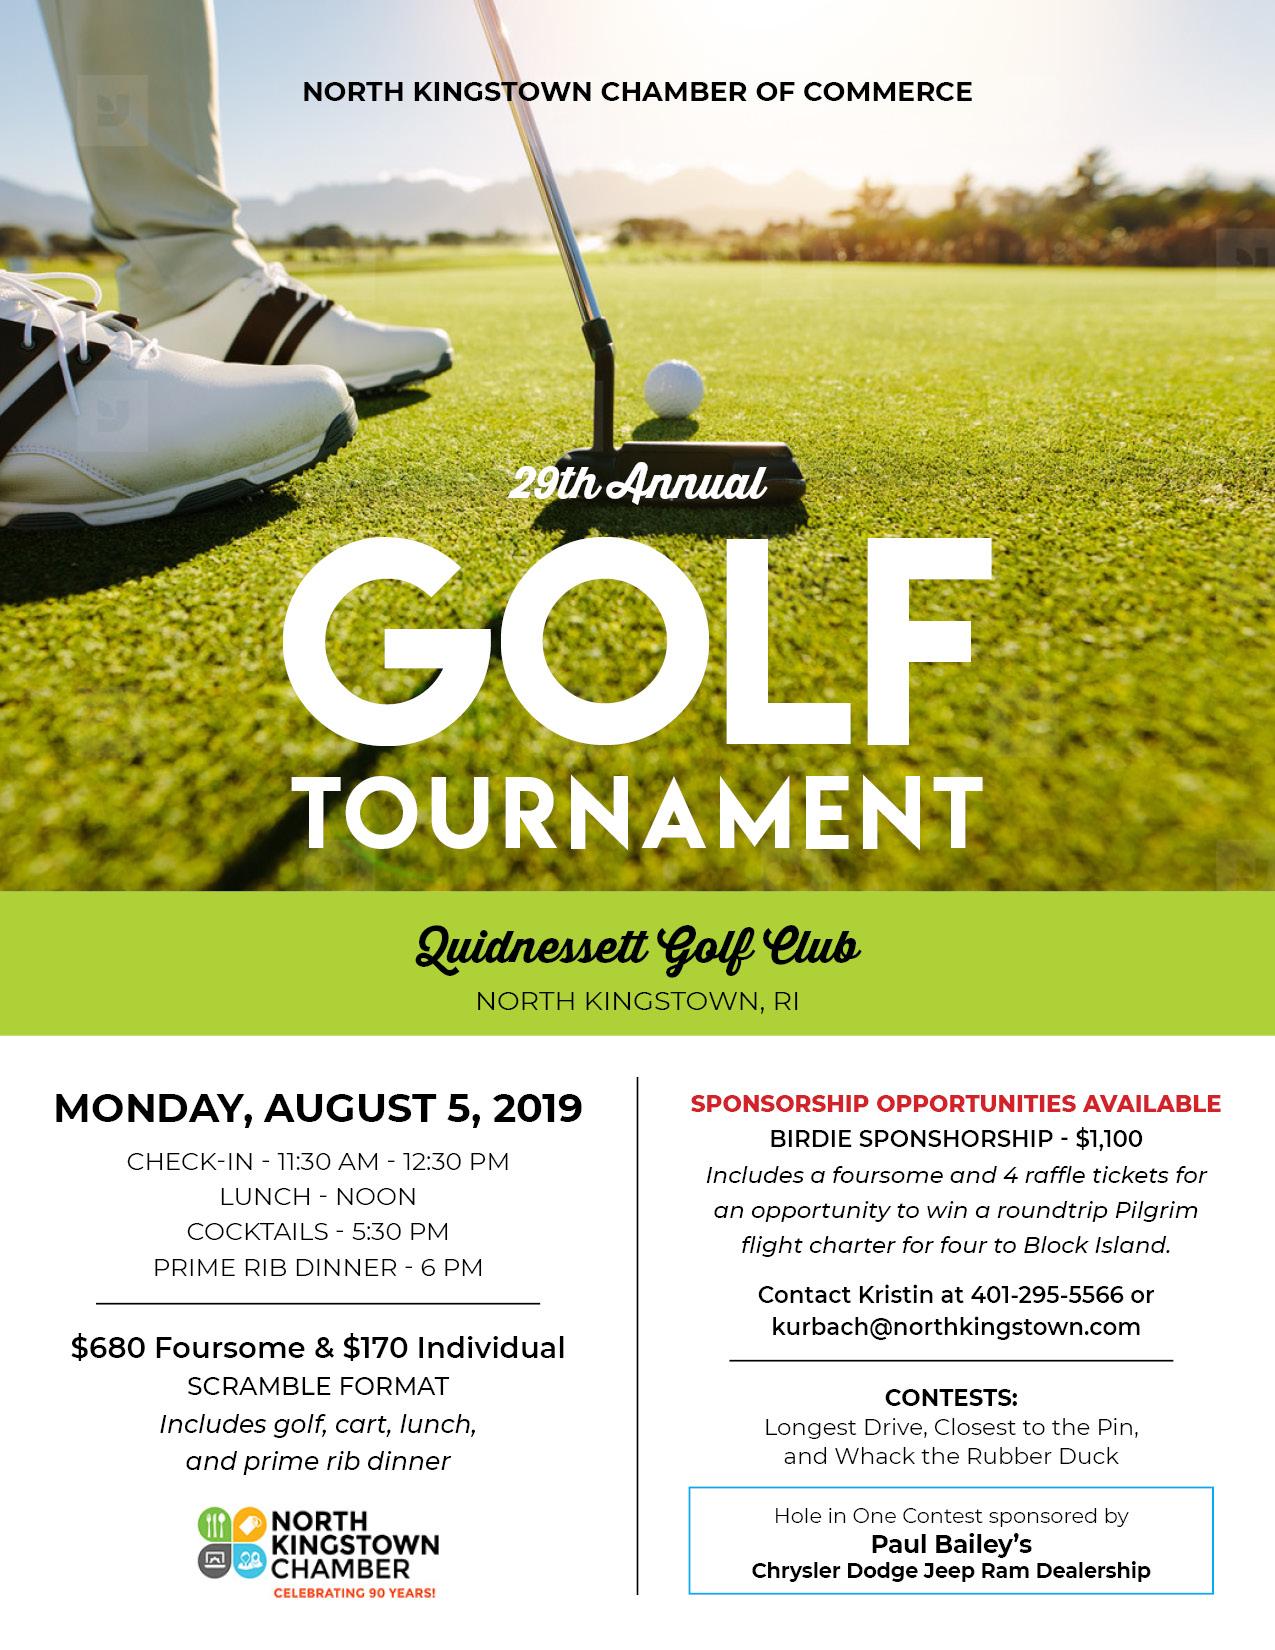 NK Chamber 29th Annual Golf Tournament includes lunch and prime rib dinner!